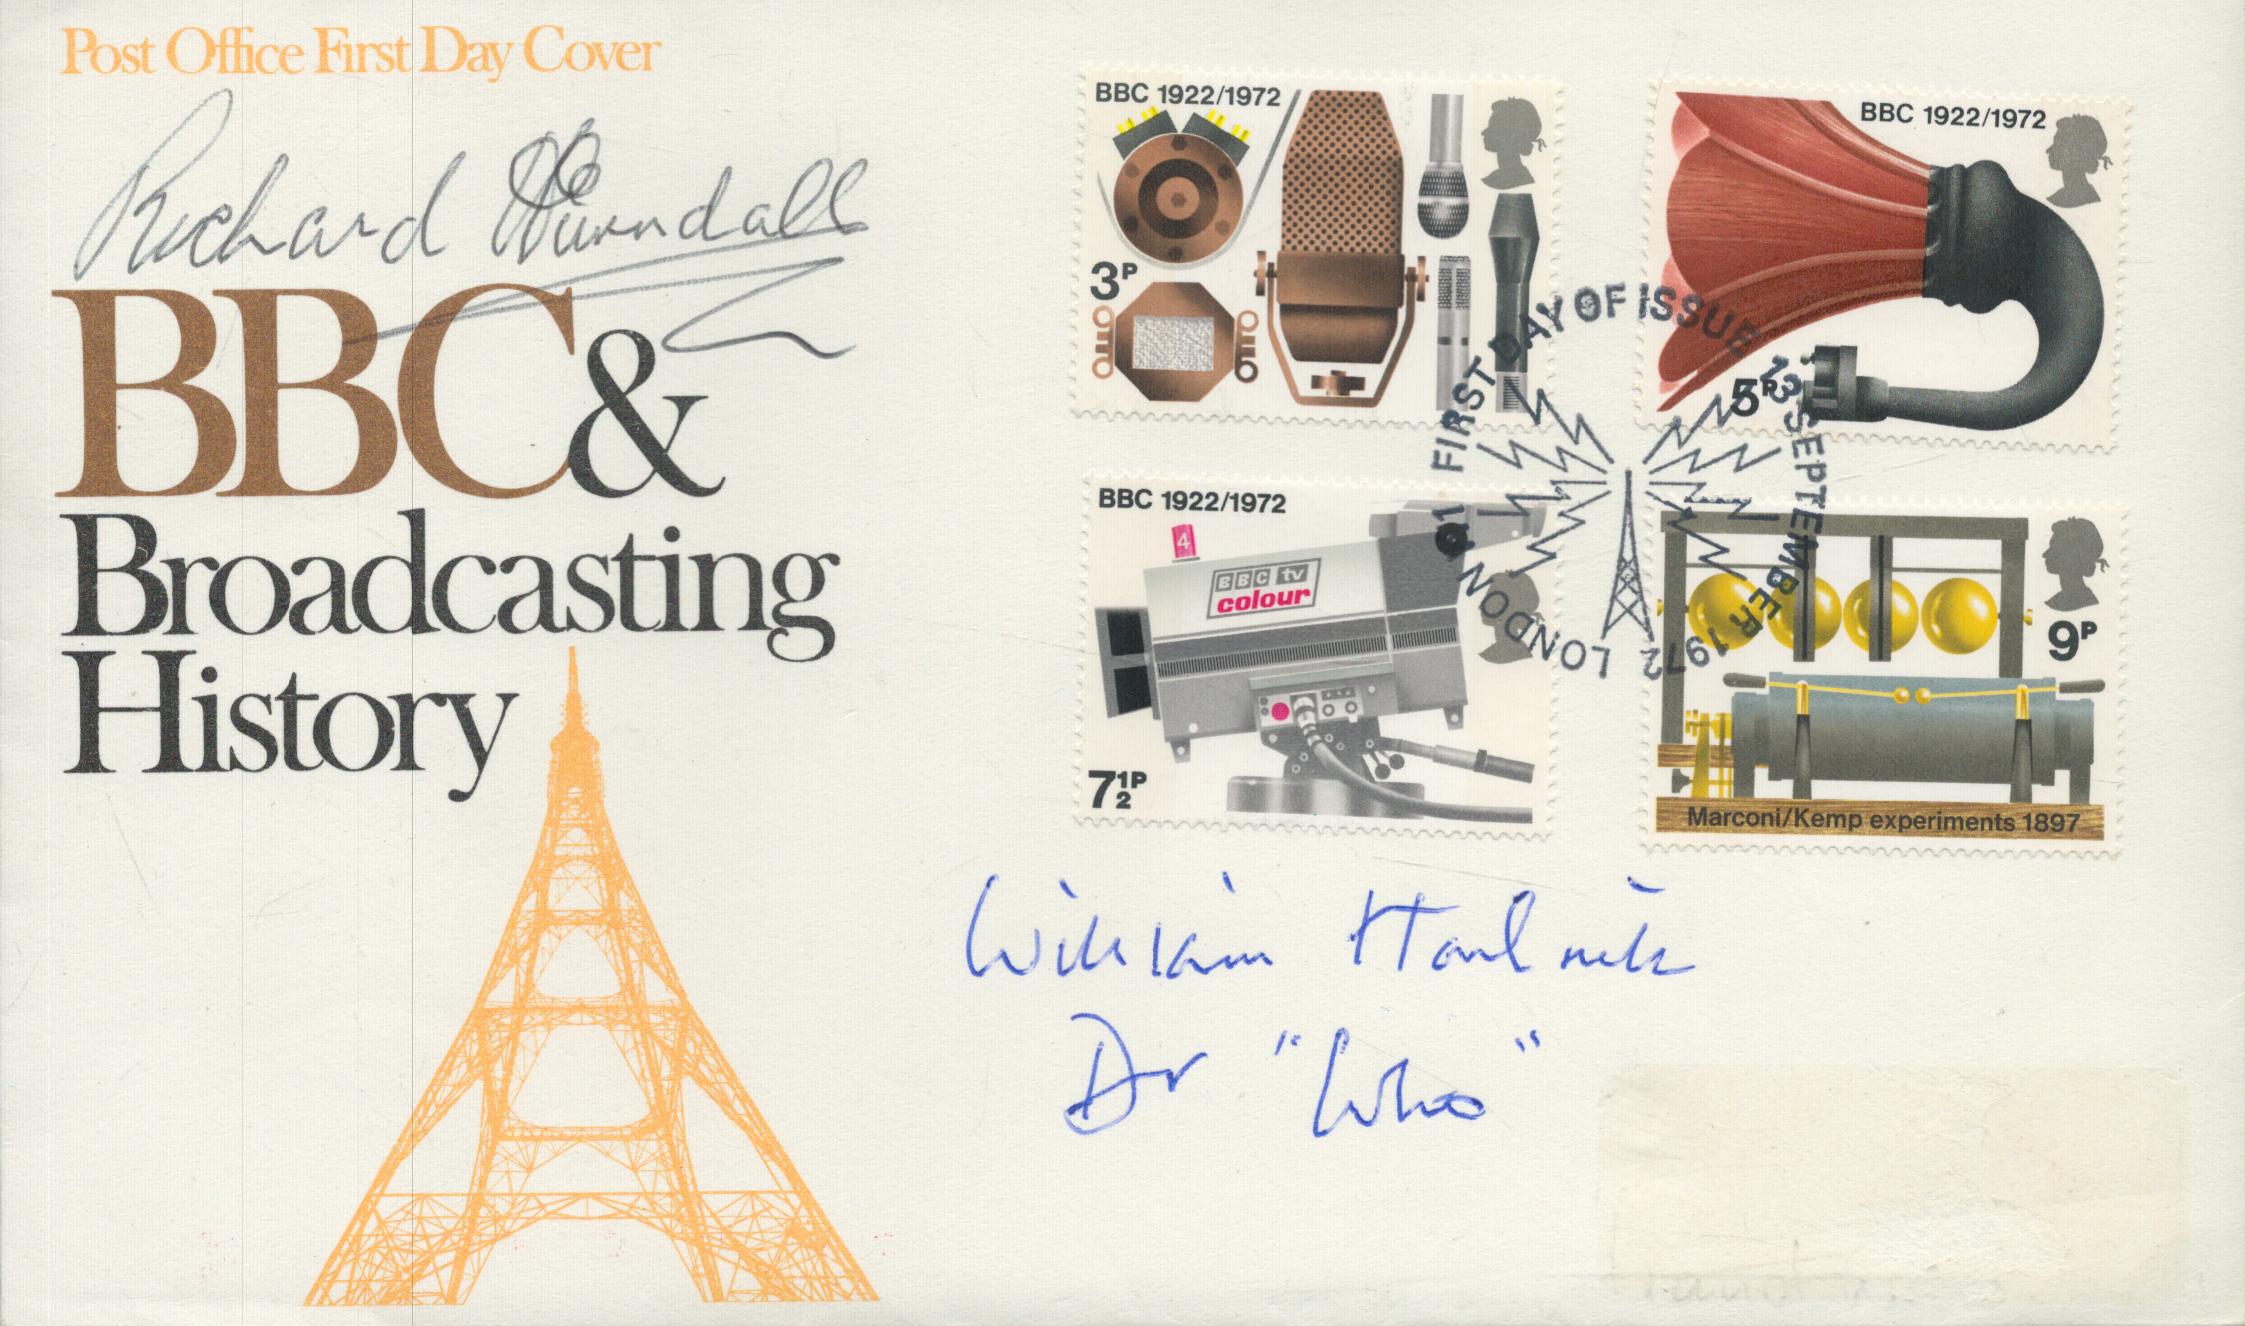 Doctor Who - a Broadcasting History FDC signed by William Hartnell (1908-1975) and Richard